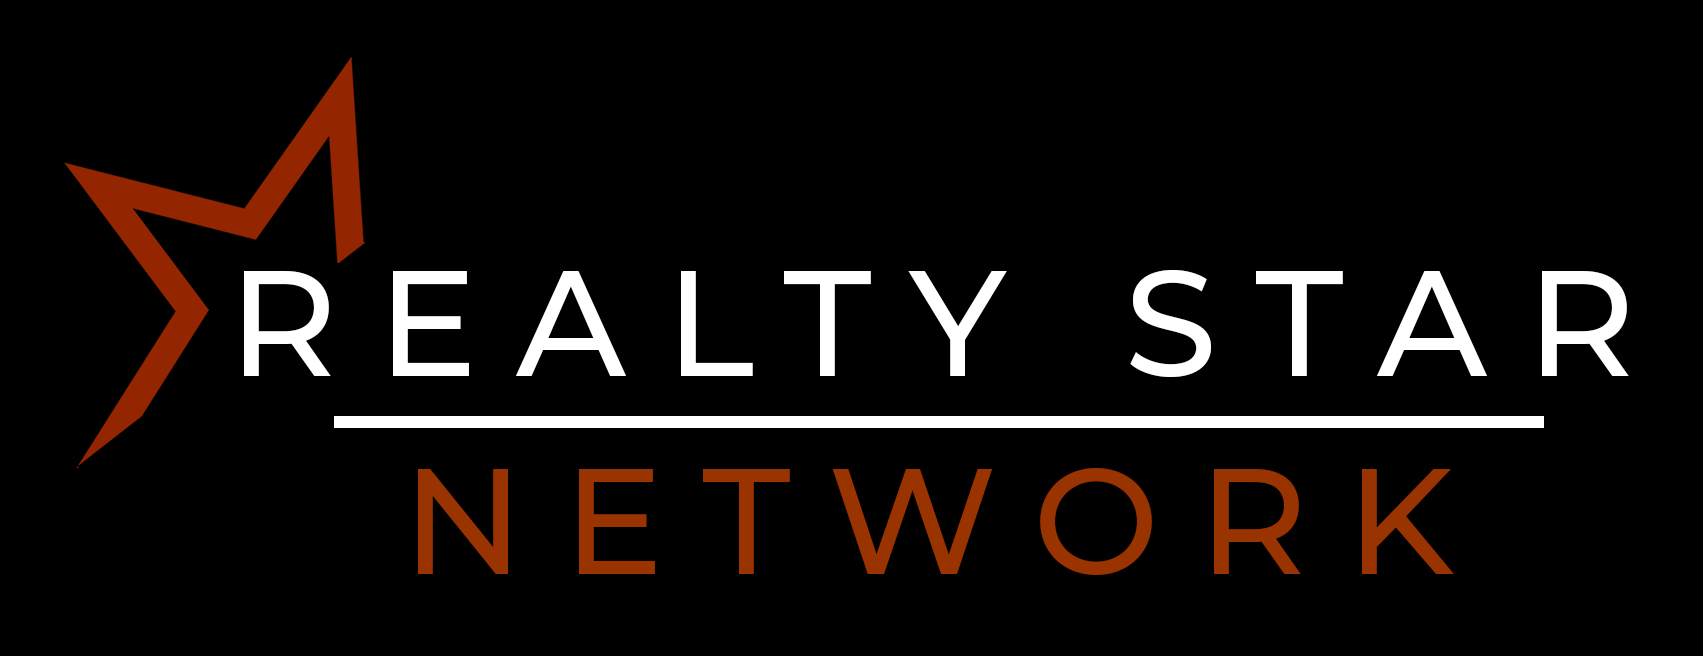 Realty Star Network